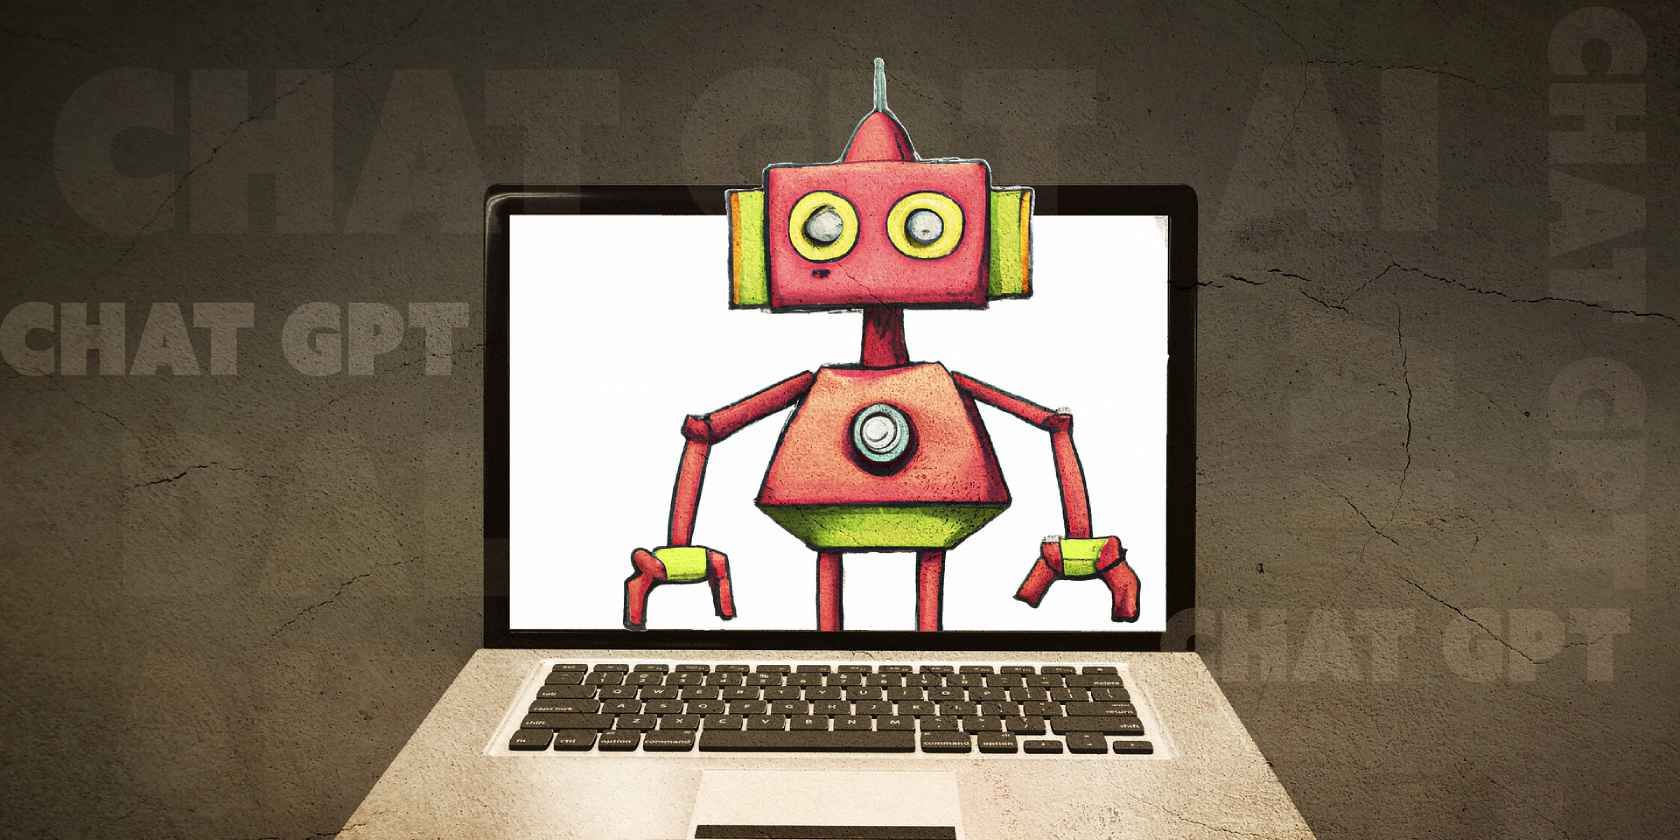 6 Amazing ChatGPT Chrome Extensions for Better AI Prompts and Answers in Browsers